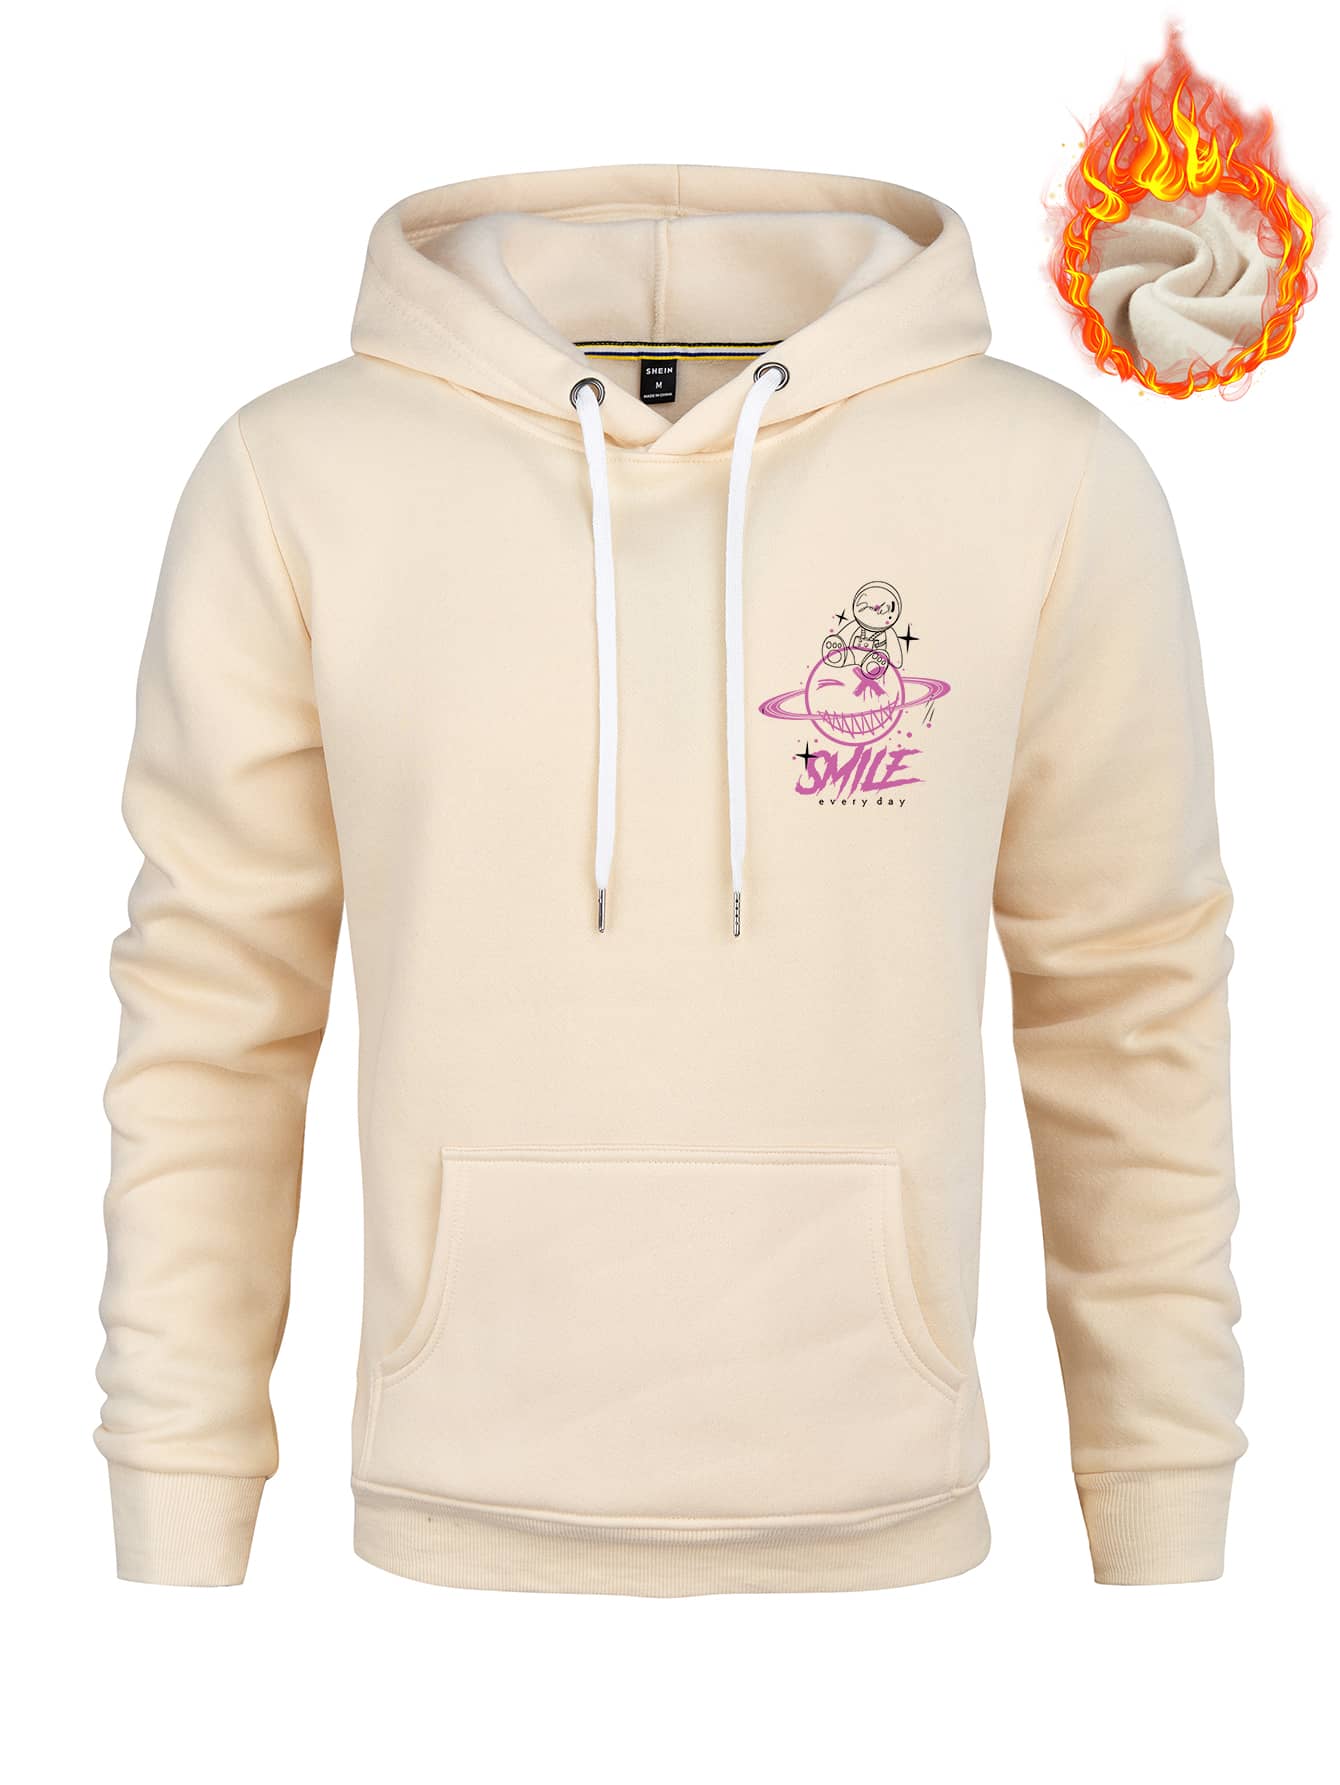 Be Your Best Self Thermal Lined Hoodie